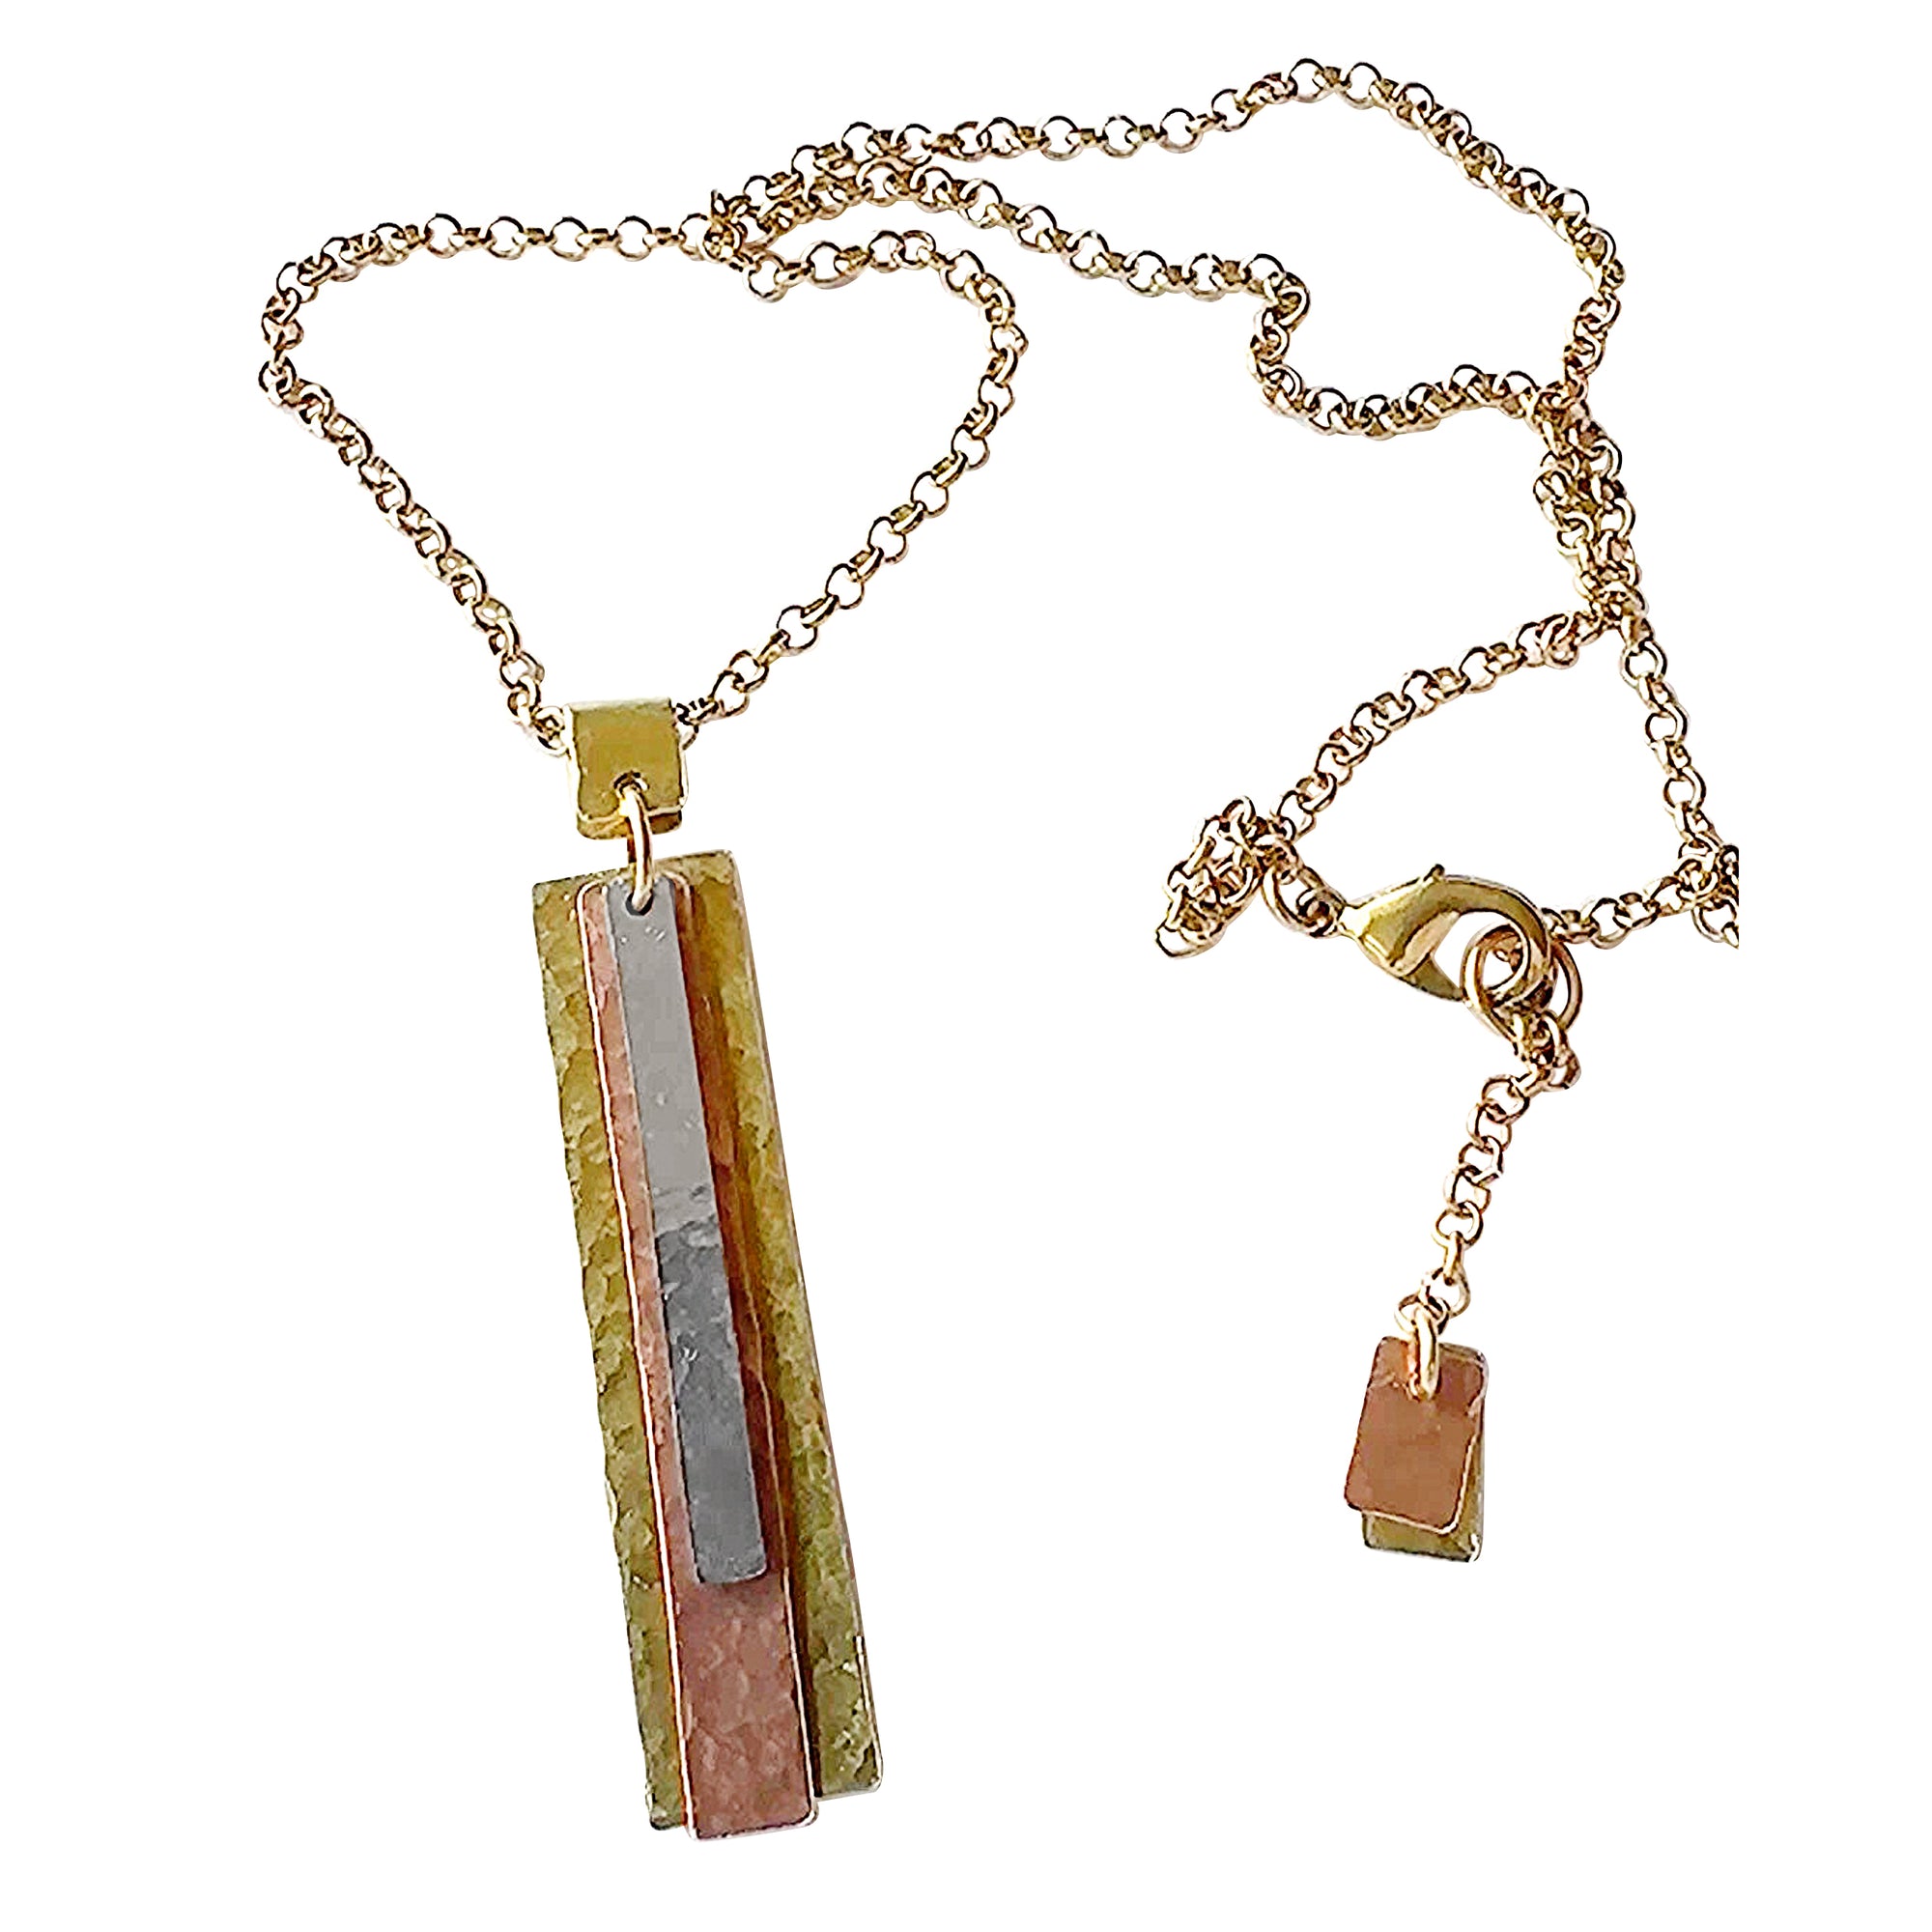 Layered Stainless Steel, Copper, Brass Pendant Necklace